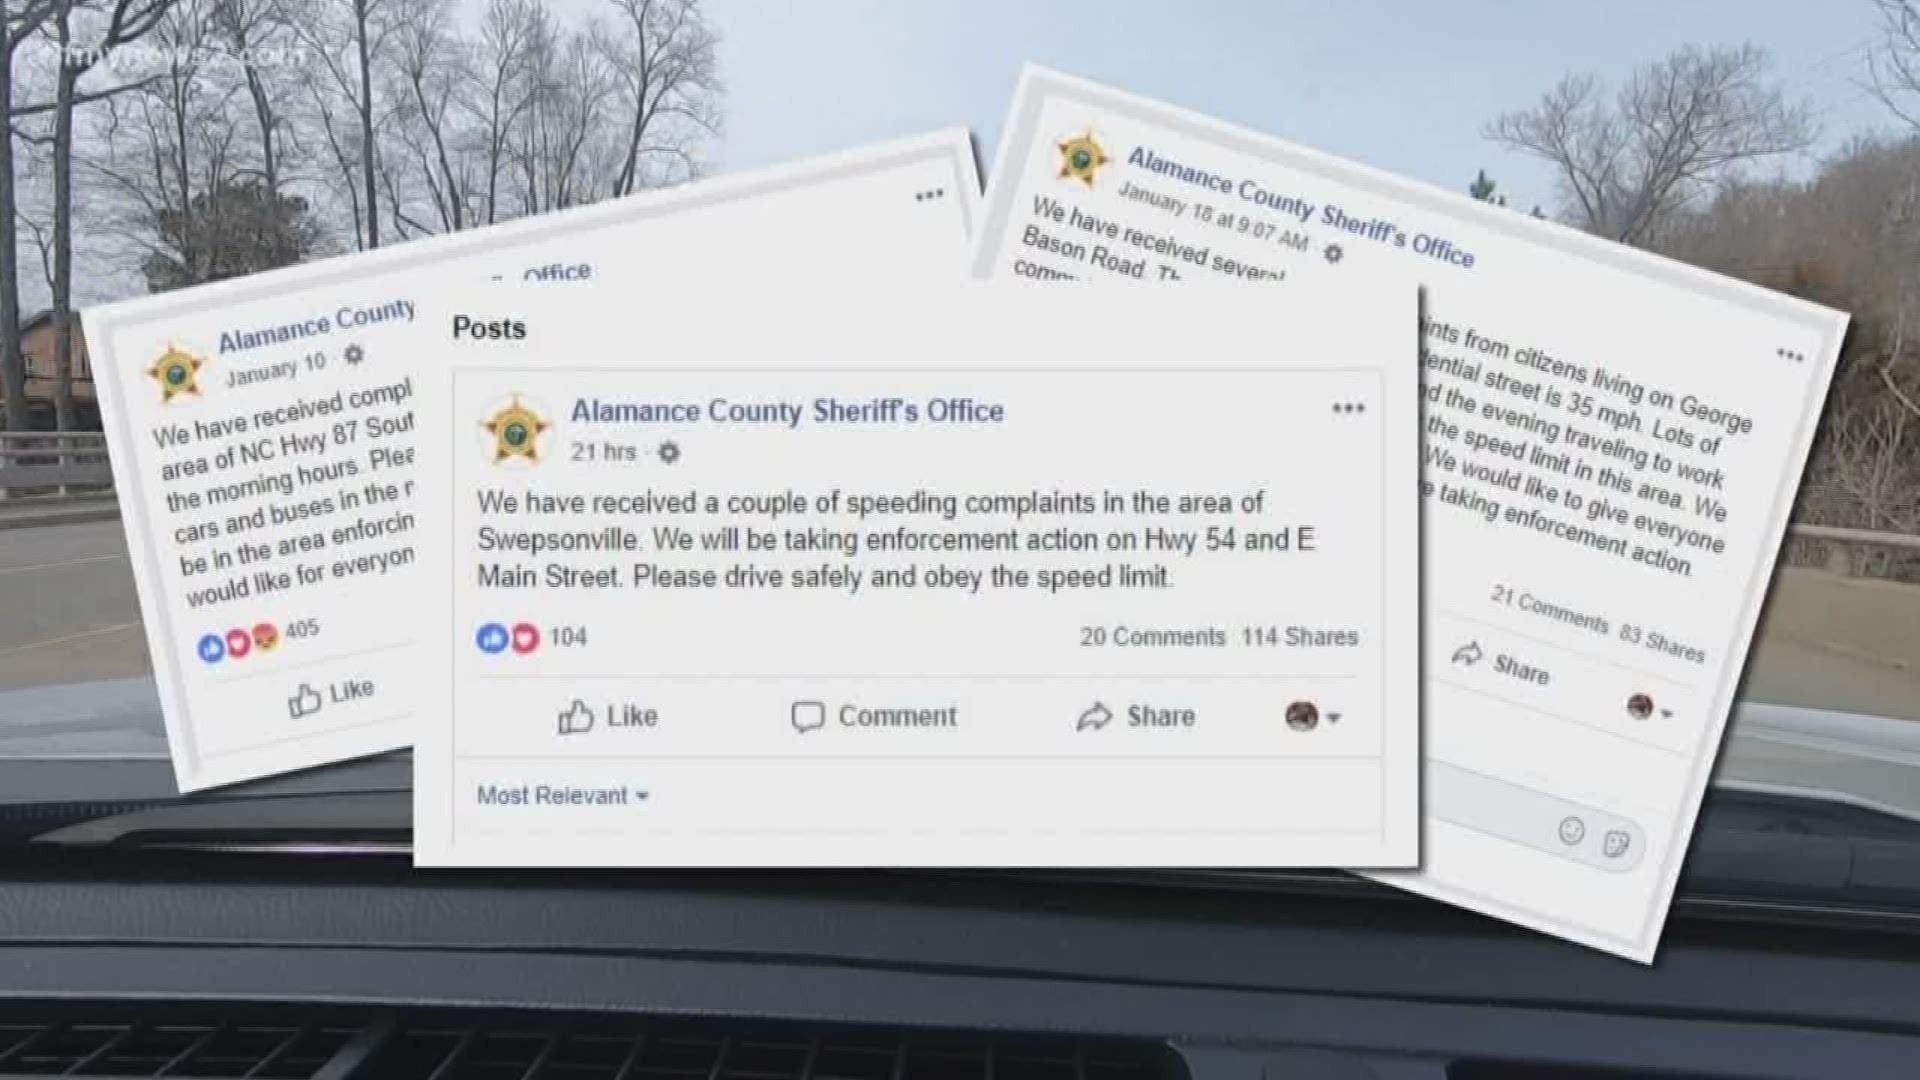 After a post from the sheriff’s department revealed a speeding problem in one neighborhood, we take a look at how serious the problem really is.